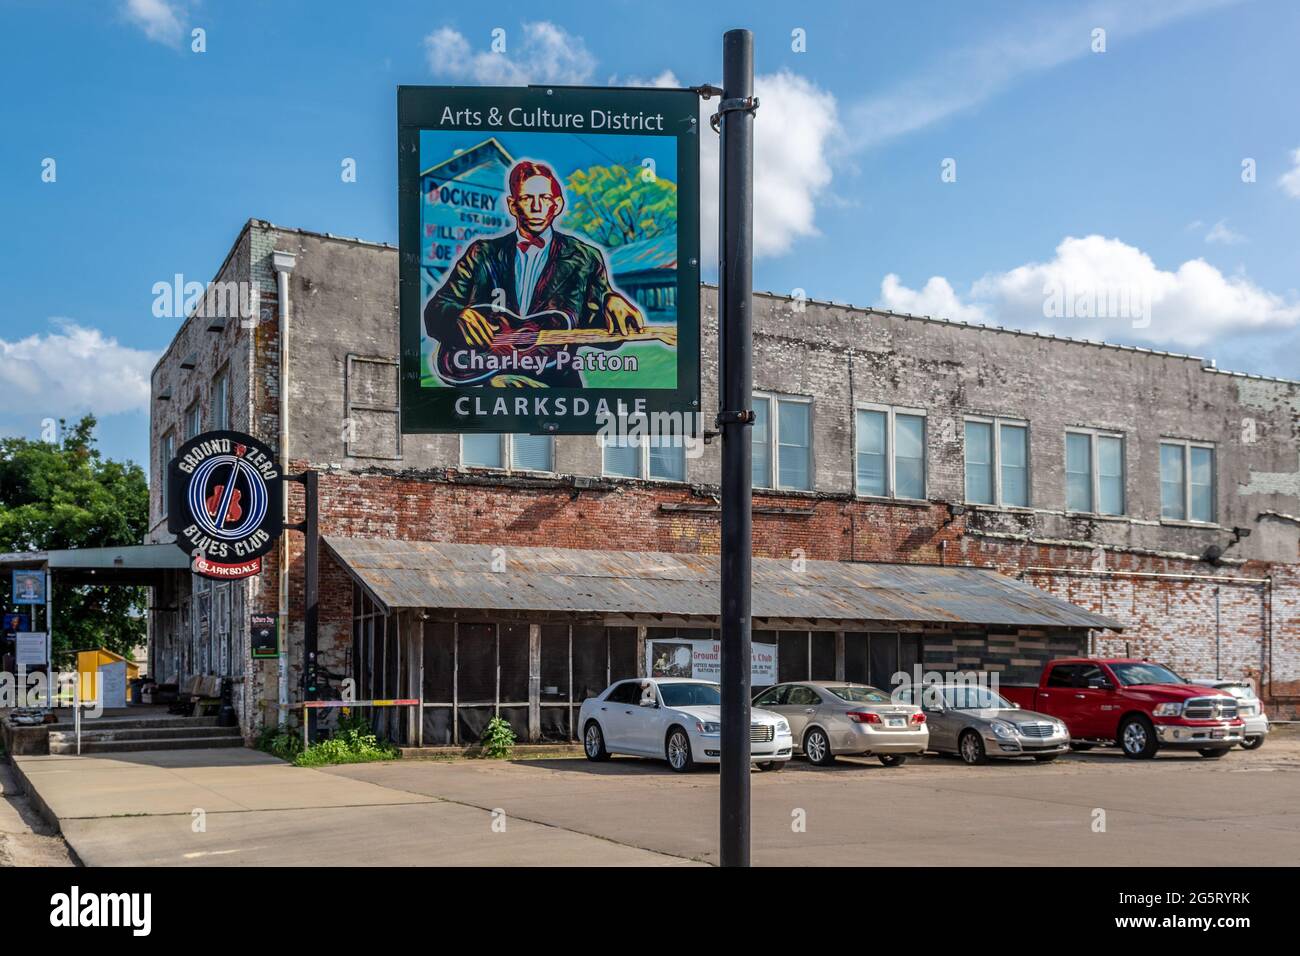 Clarksdale, Mississippi Arts and Culture District including Groind Zero Blues Club. Stock Photo